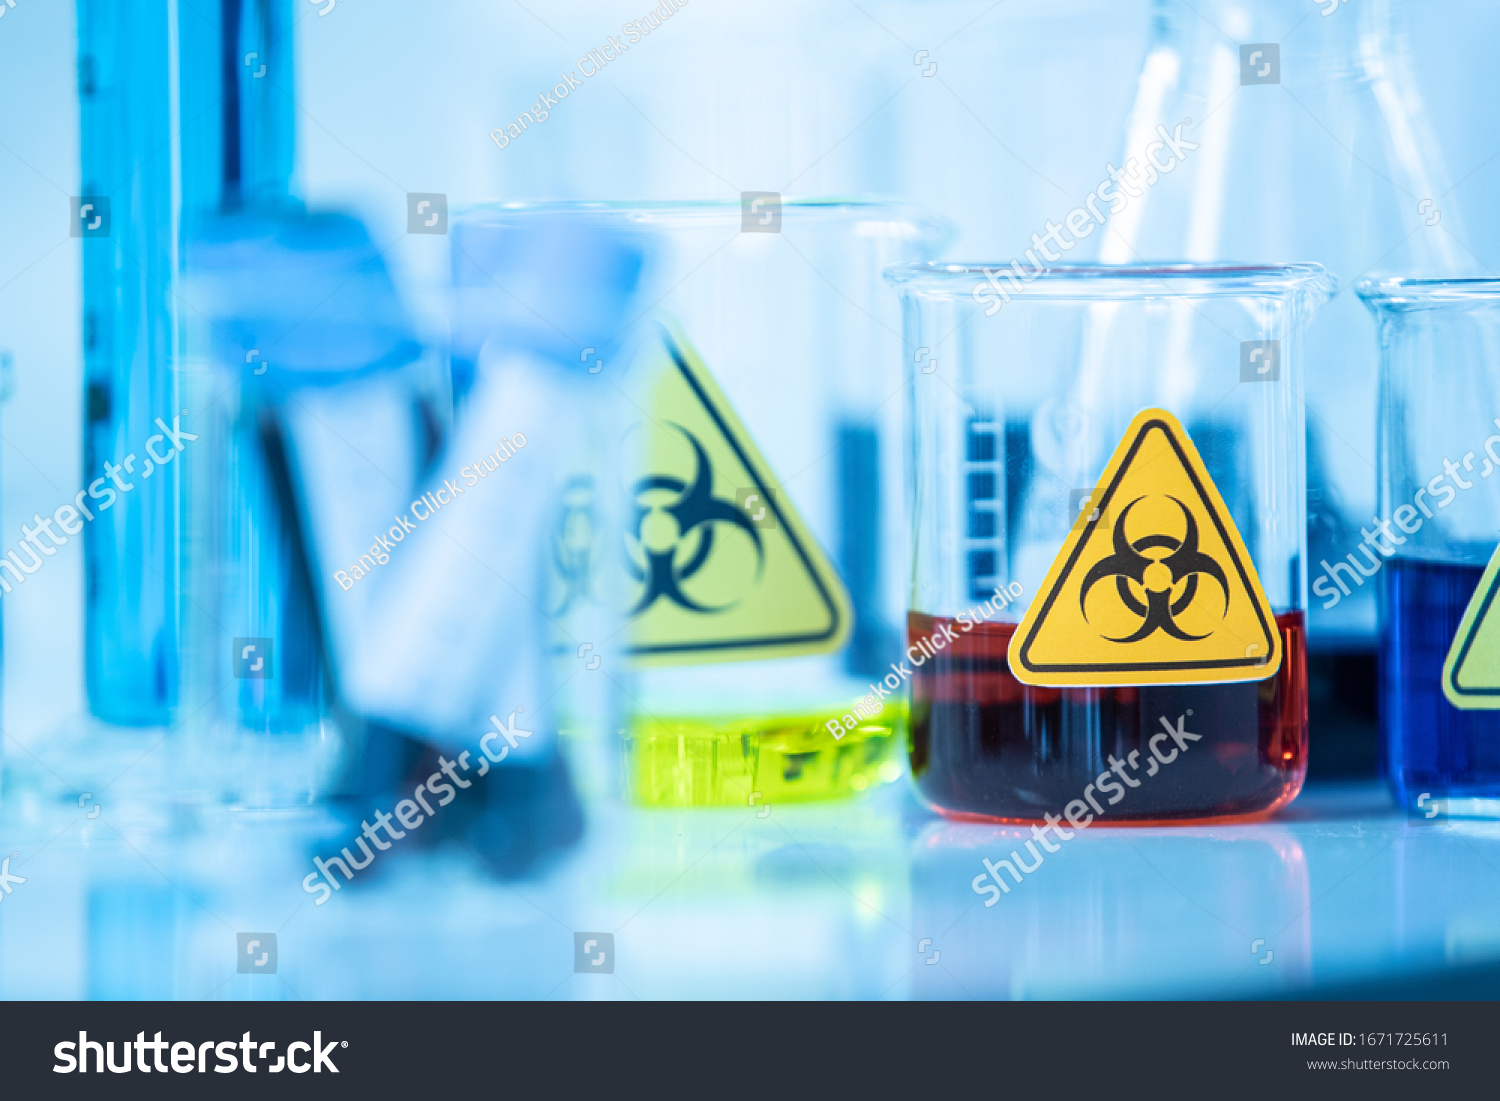 Beaker of sample test, red liquid solution in container with biological hazard warning sticker in laboratory. Idea for science research of contagious disease, virus or other infective pestilence. #1671725611